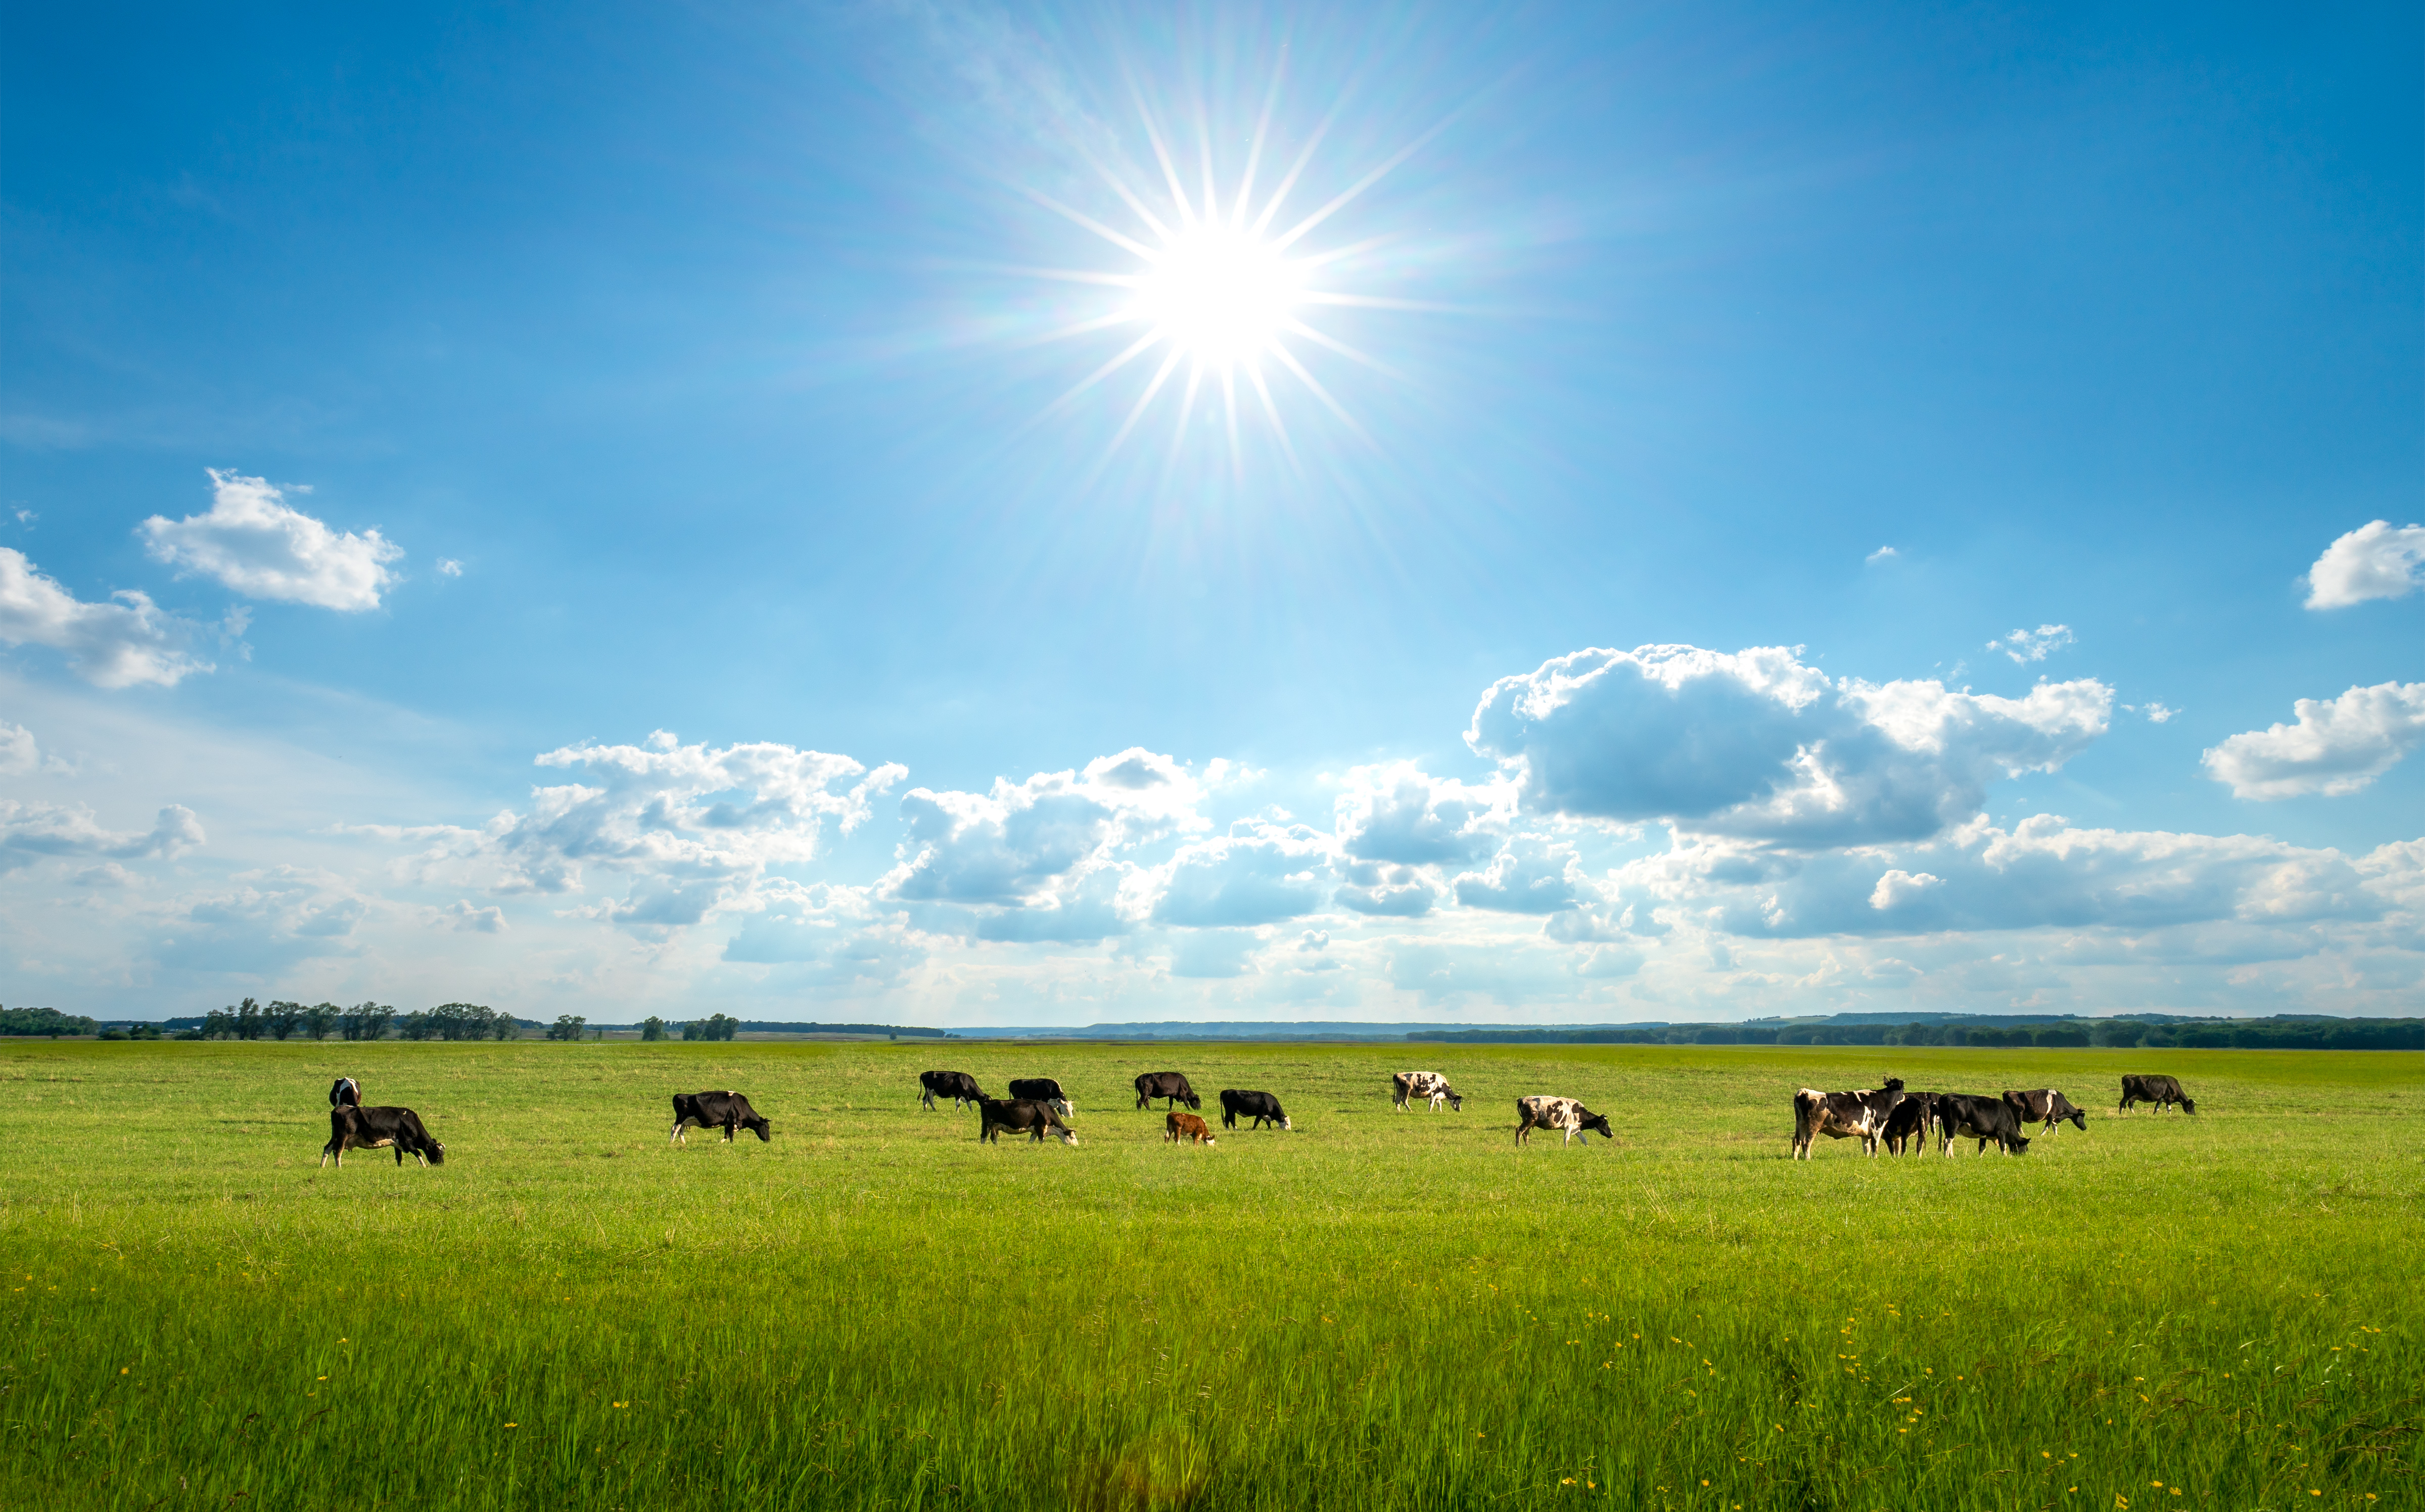 The Green Hoofprint: Cattle's Positive Impact on Earth